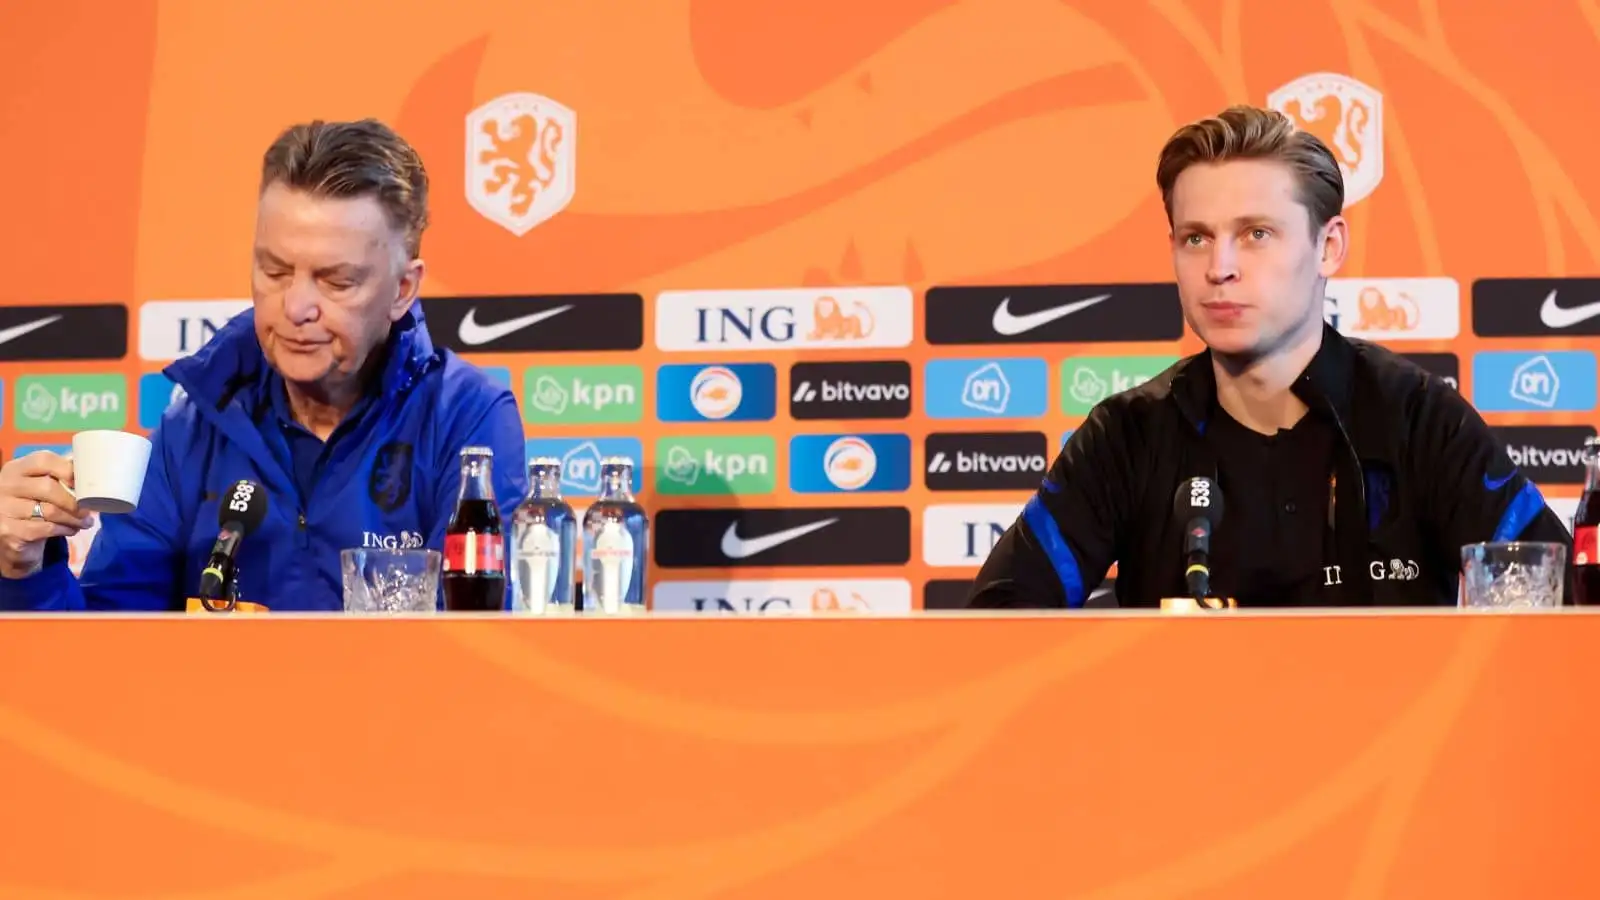 Frenkie de Jong and Louis van Gaal, Netherlands, during a Press Conference of the Netherlands Men’s Football Team at the KNVB Campus